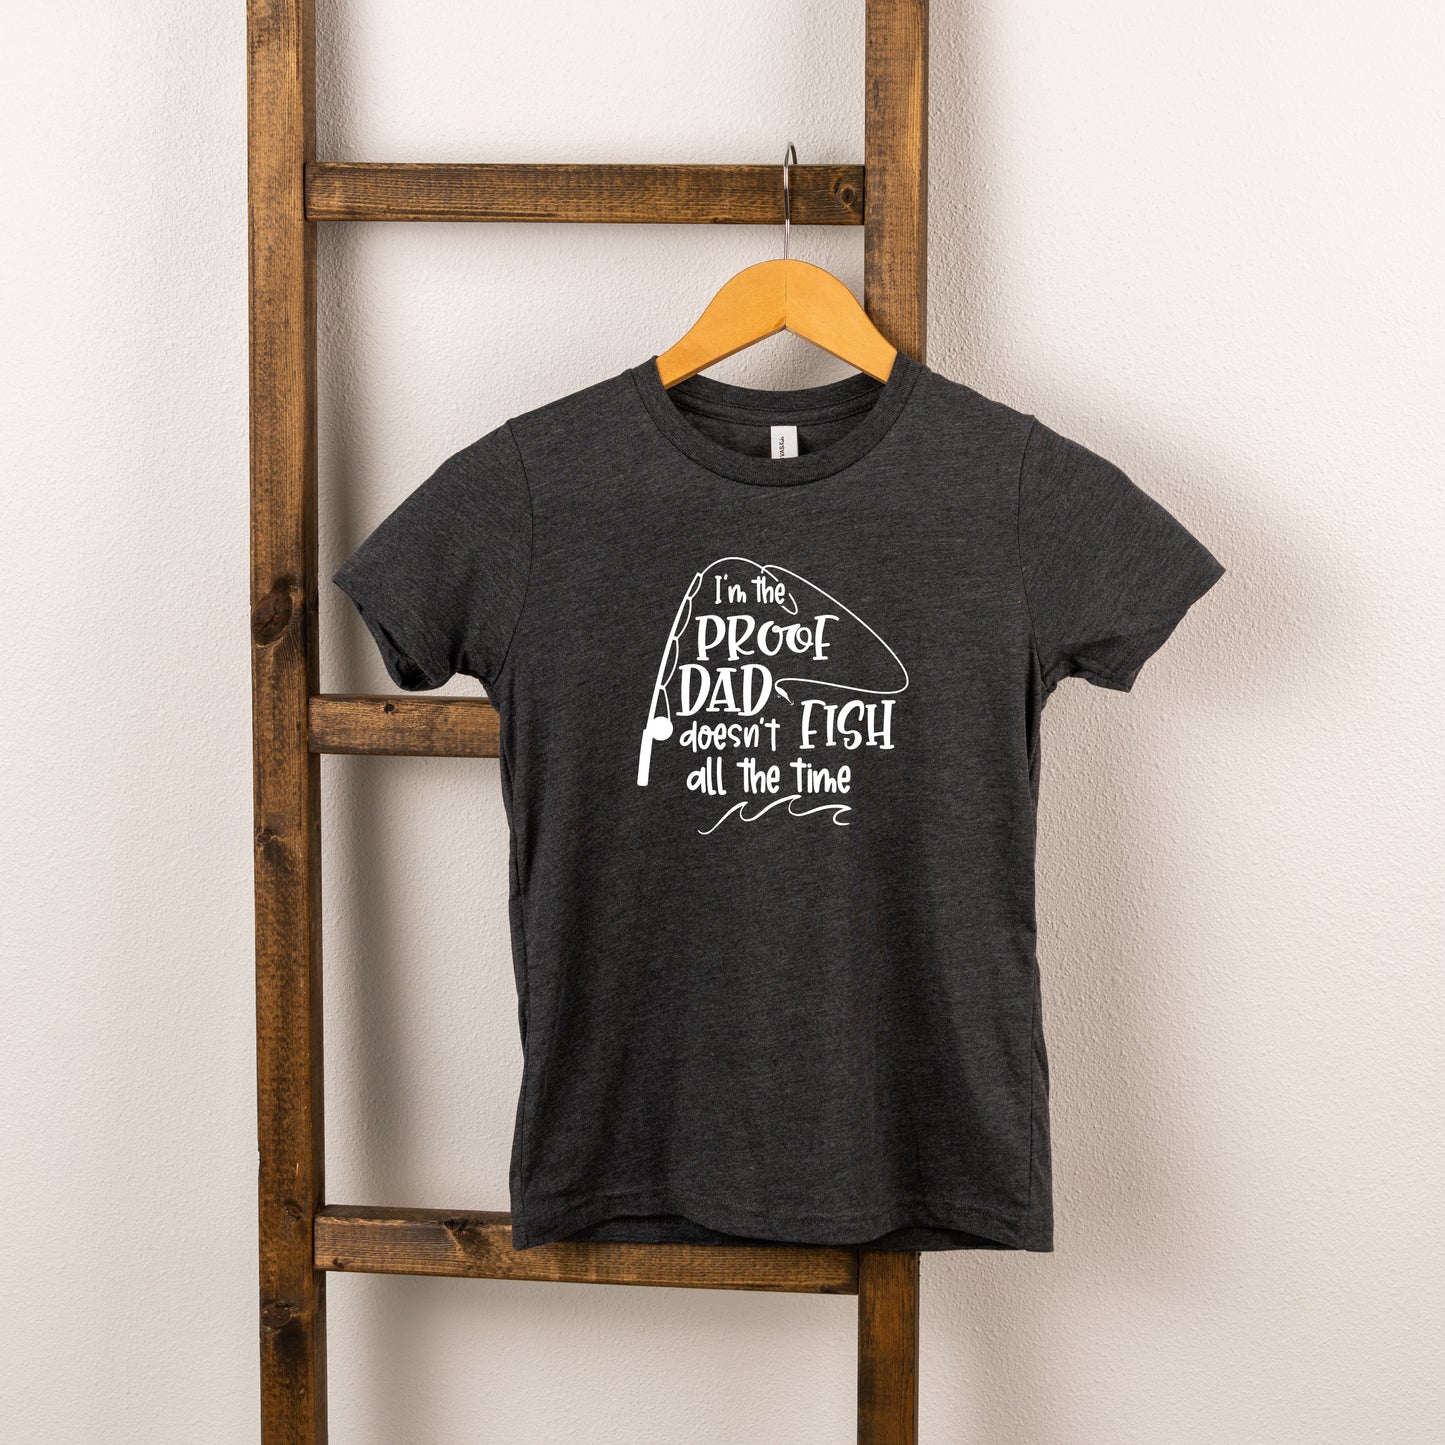 Proof Dad Doesn't Fish All The Time | Toddler Short Sleeve Crew Neck